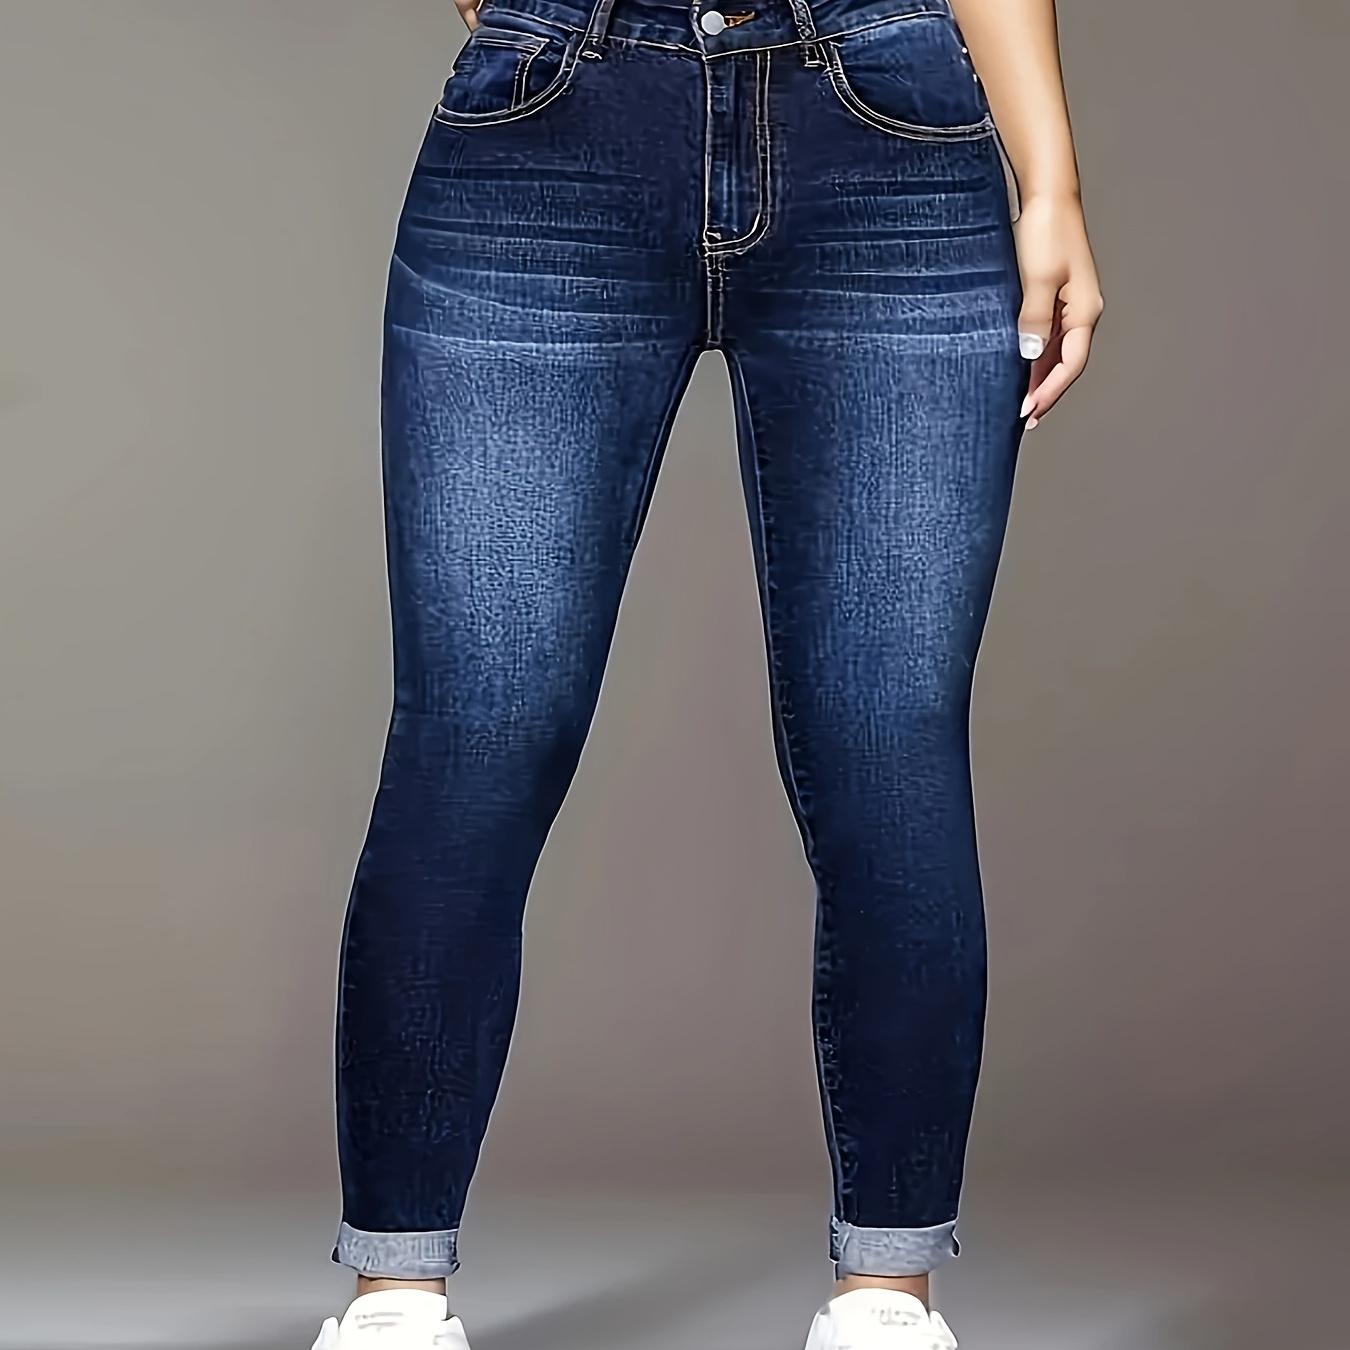 

Women's Plus Size High Waist Skinny Jeans, Stretchy Casual Style Plain Washed Denim Pants, Fashionable Slim Fit Trousers